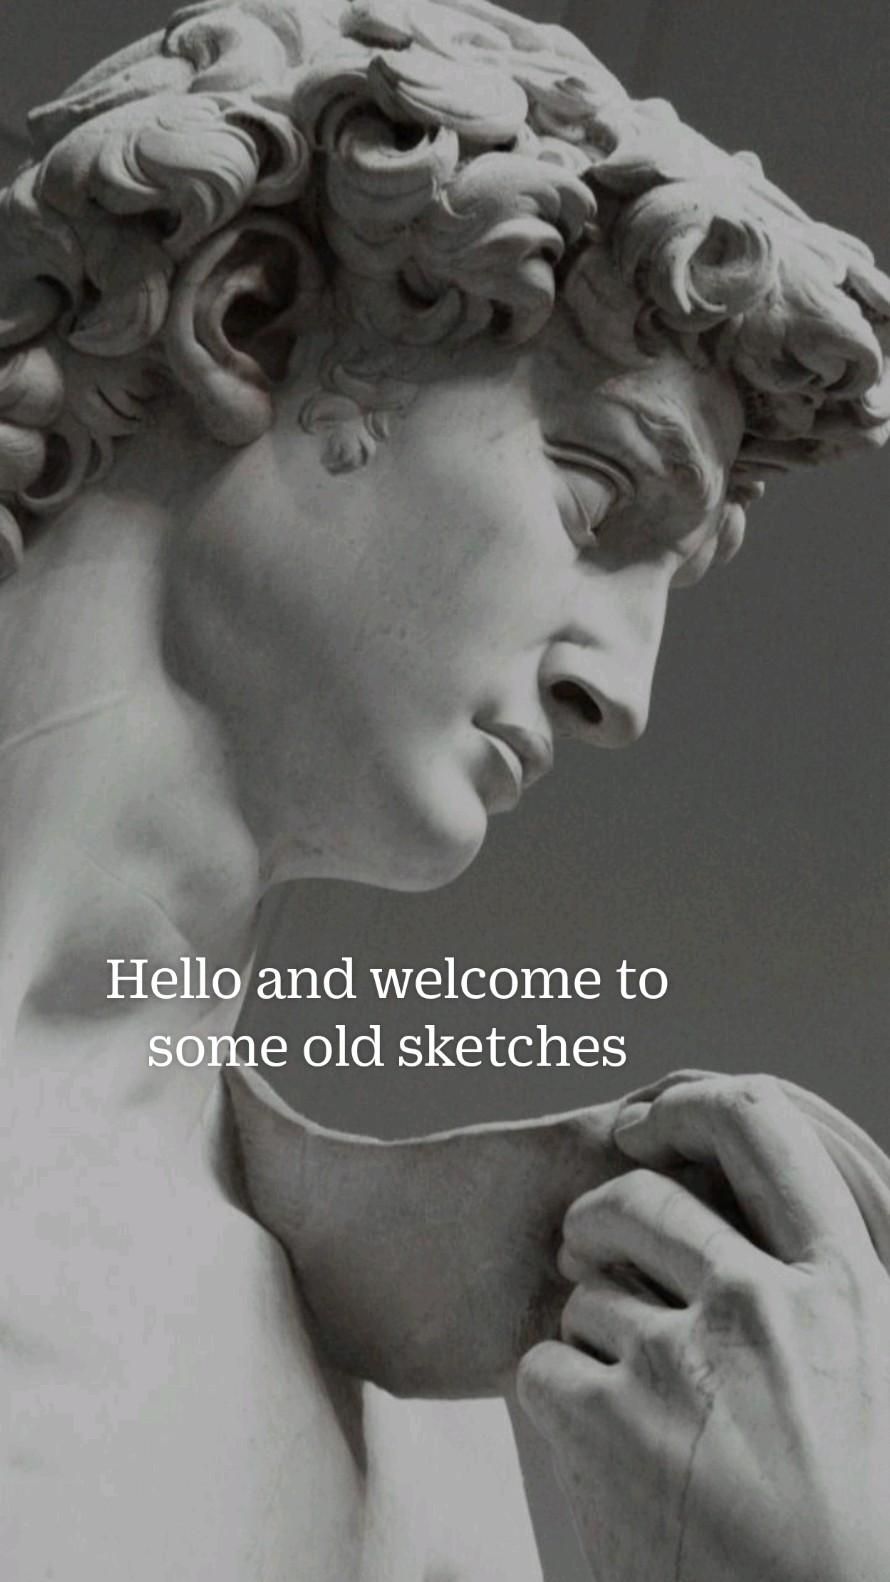 A statue of david with the words hello and welcome to song old sketches - Greek statue